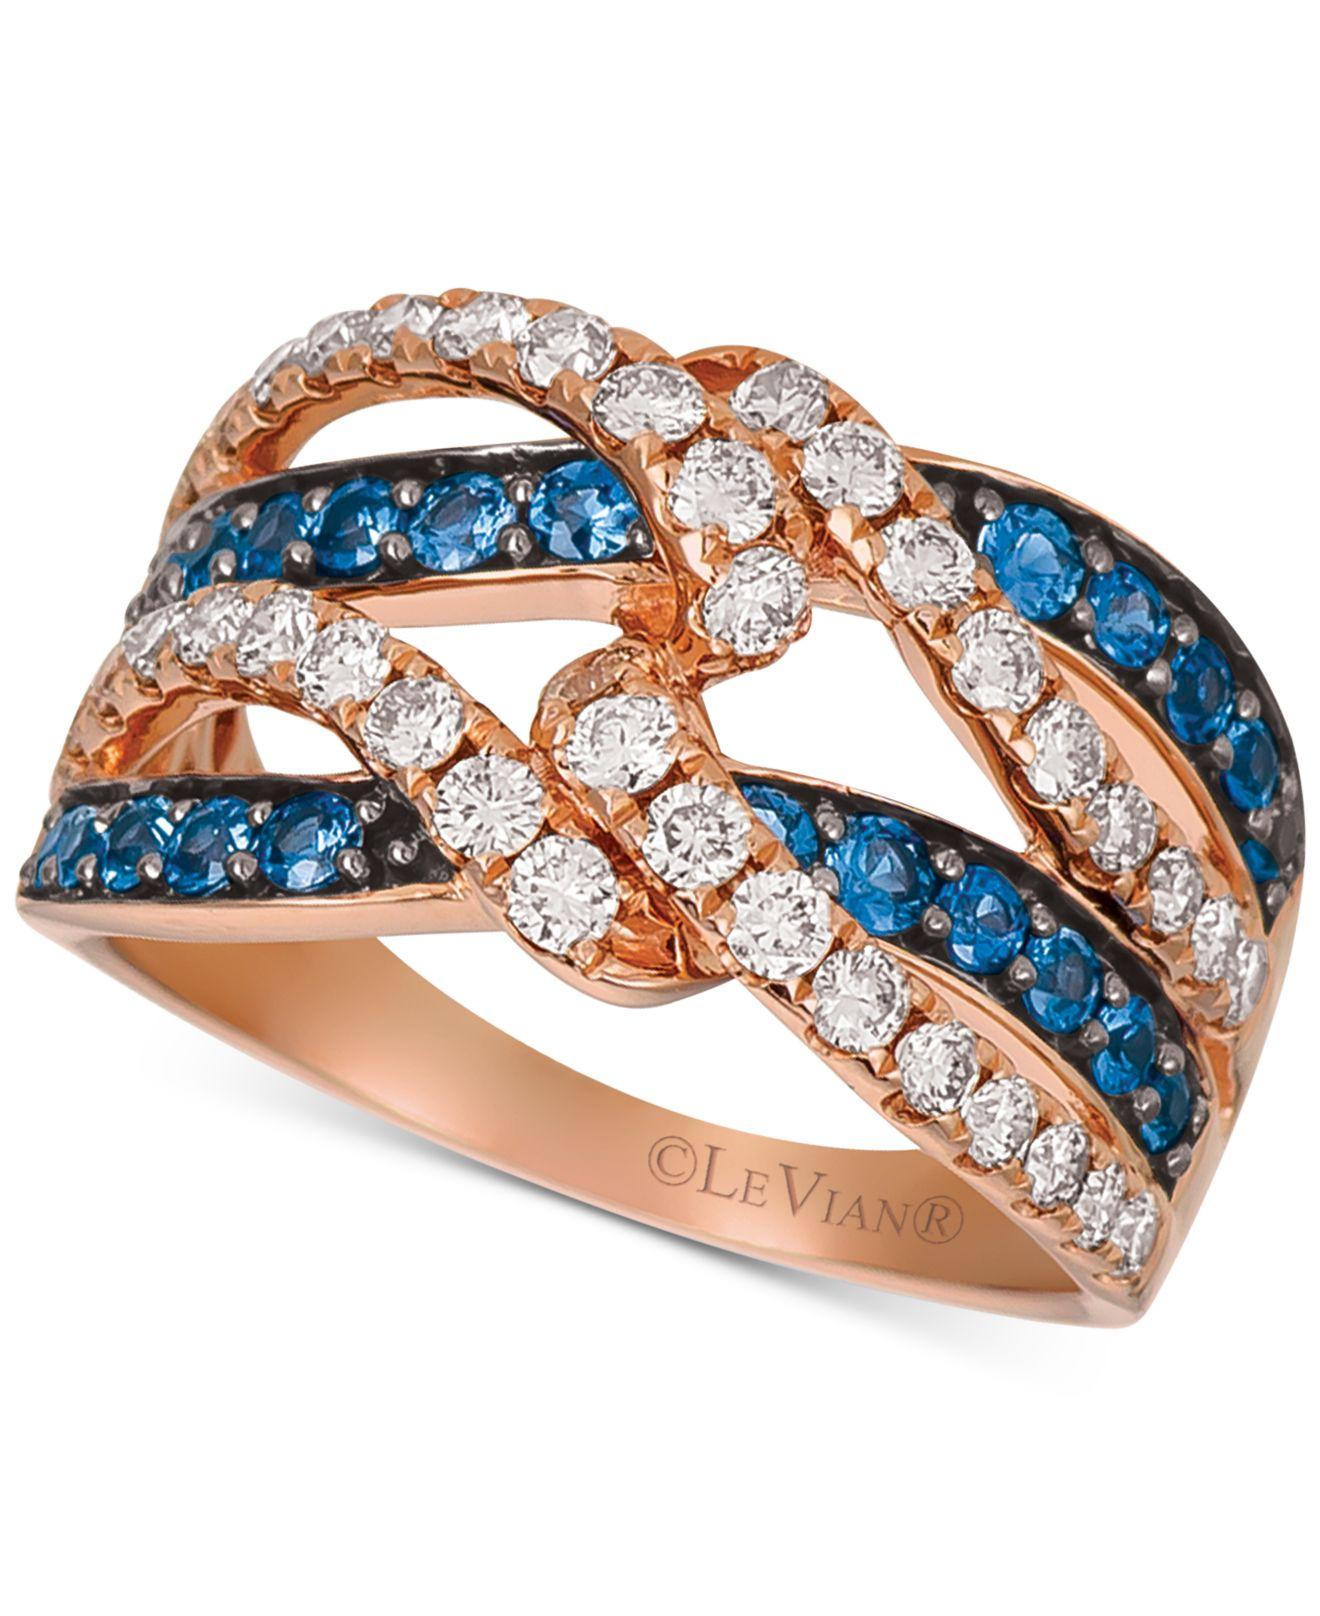 Le Vian ® Blueberry Sapphire (5/8 Ct. T.w.) & Diamond (7/8 Ct. T.w.) Ring In 14k Rose Gold Lyst